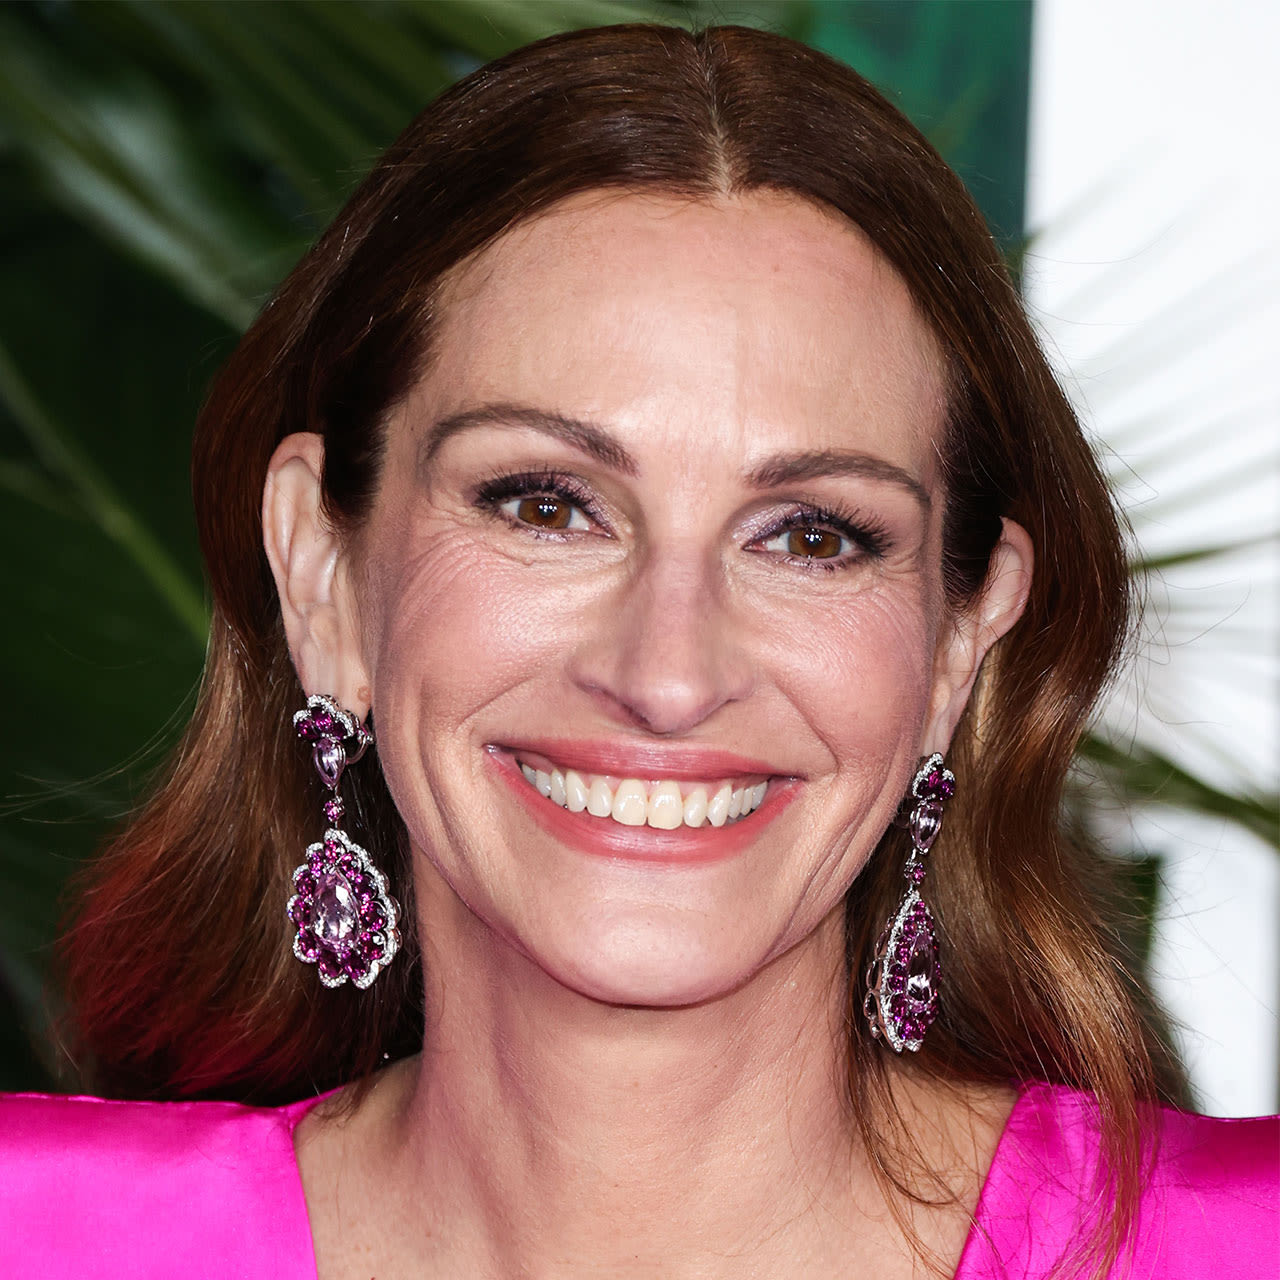 Julia Roberts Just Debuted A New Shaggy Haircut For Her Latest Magazine Cover That’s Perfect For Spring